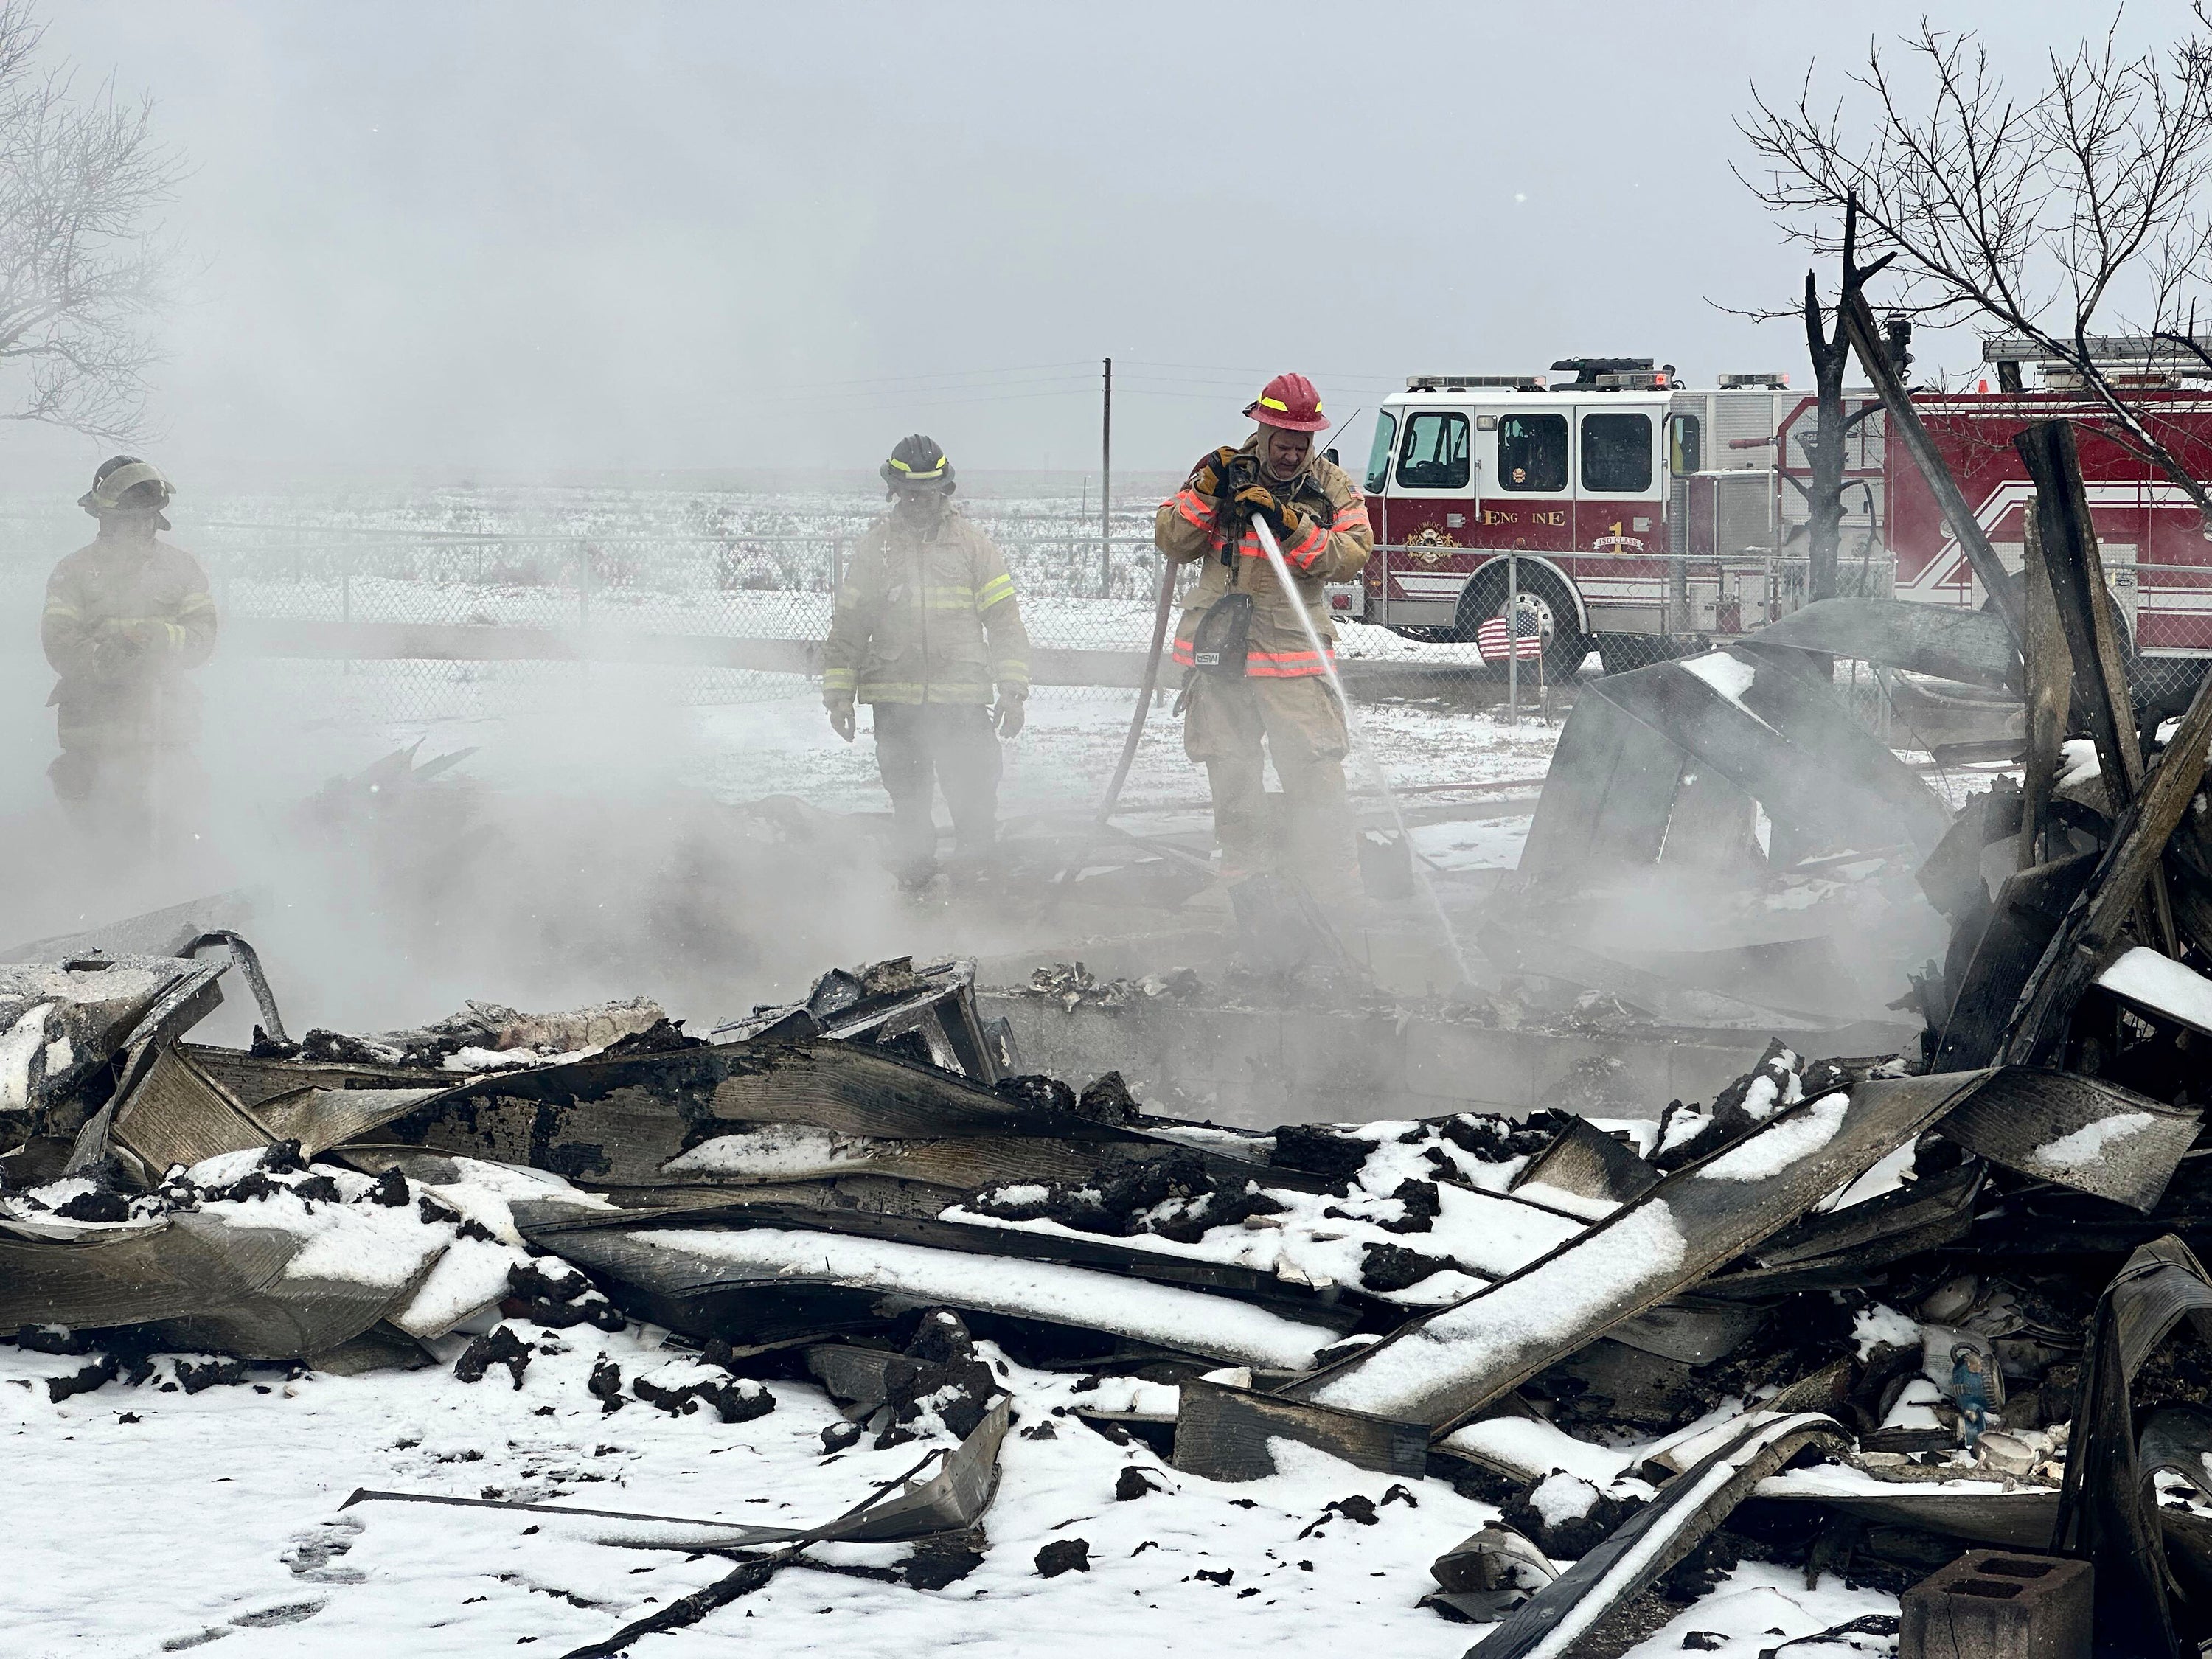 Firefighters extinguish flames in Stinnett, Texas on Thursday as snow covers the ground